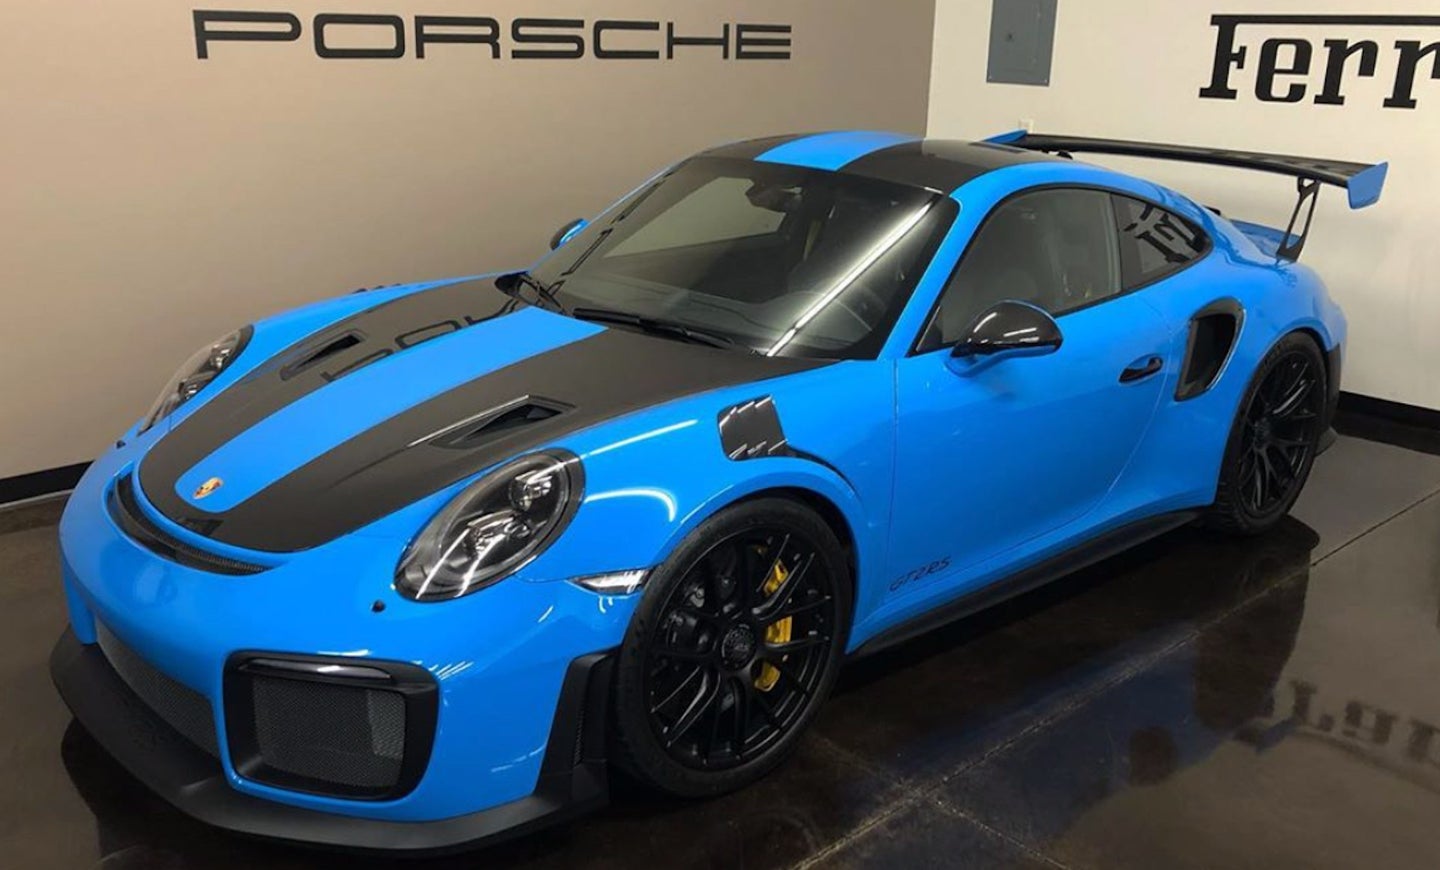 Indiana Collector Selling Low-Mileage Ferraris, 1-of-1 Porsche GT2 RS to Aid Families Affected by Coronavirus